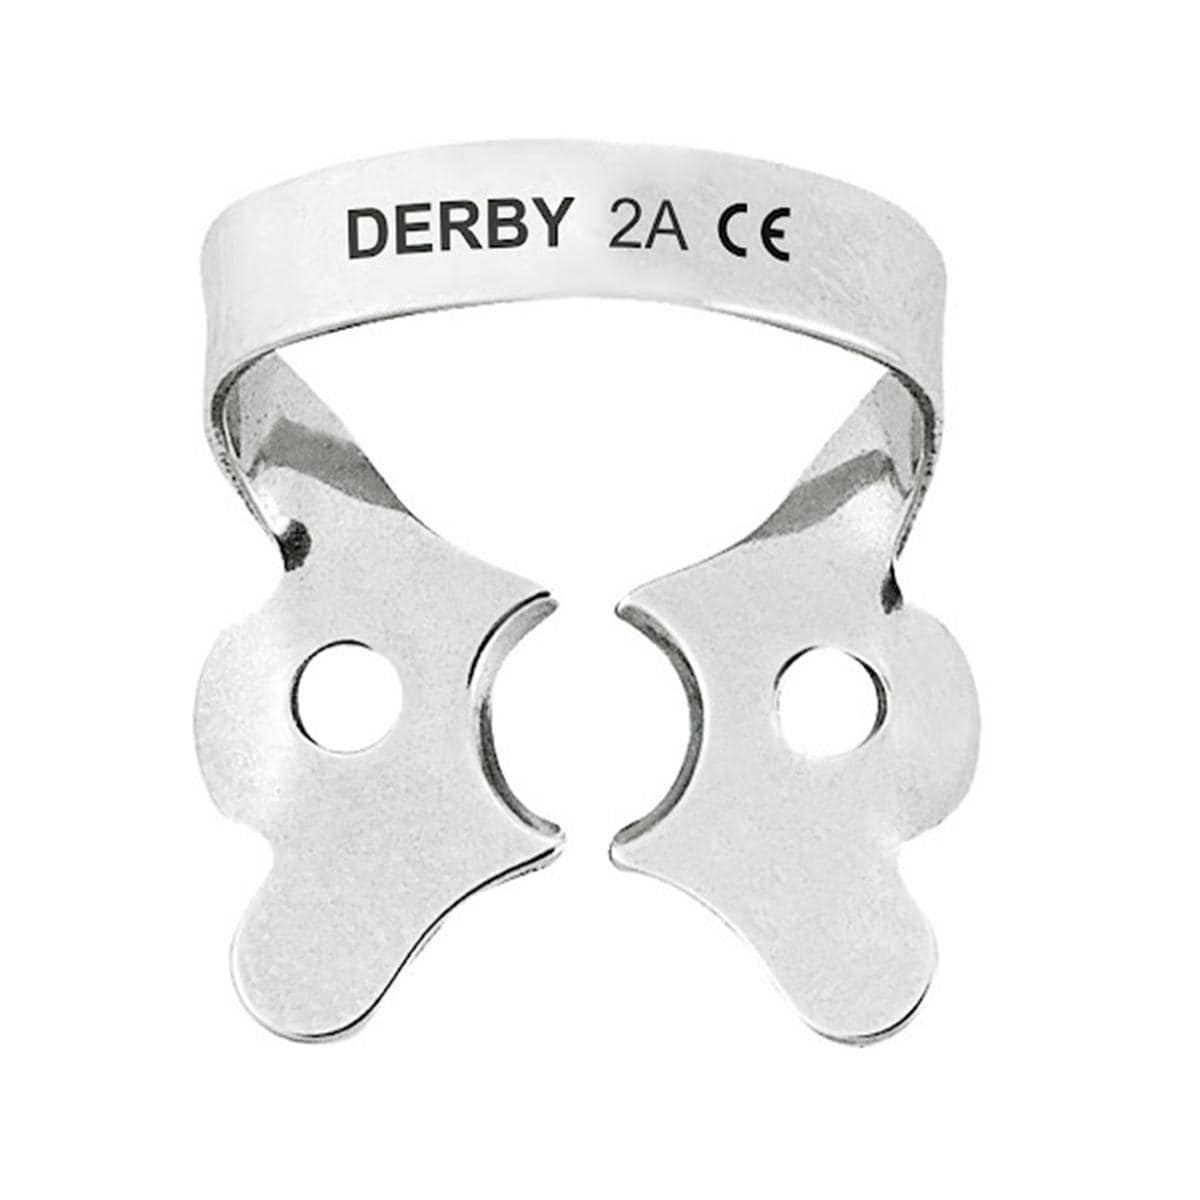 CLAMPS 2A - DERBY